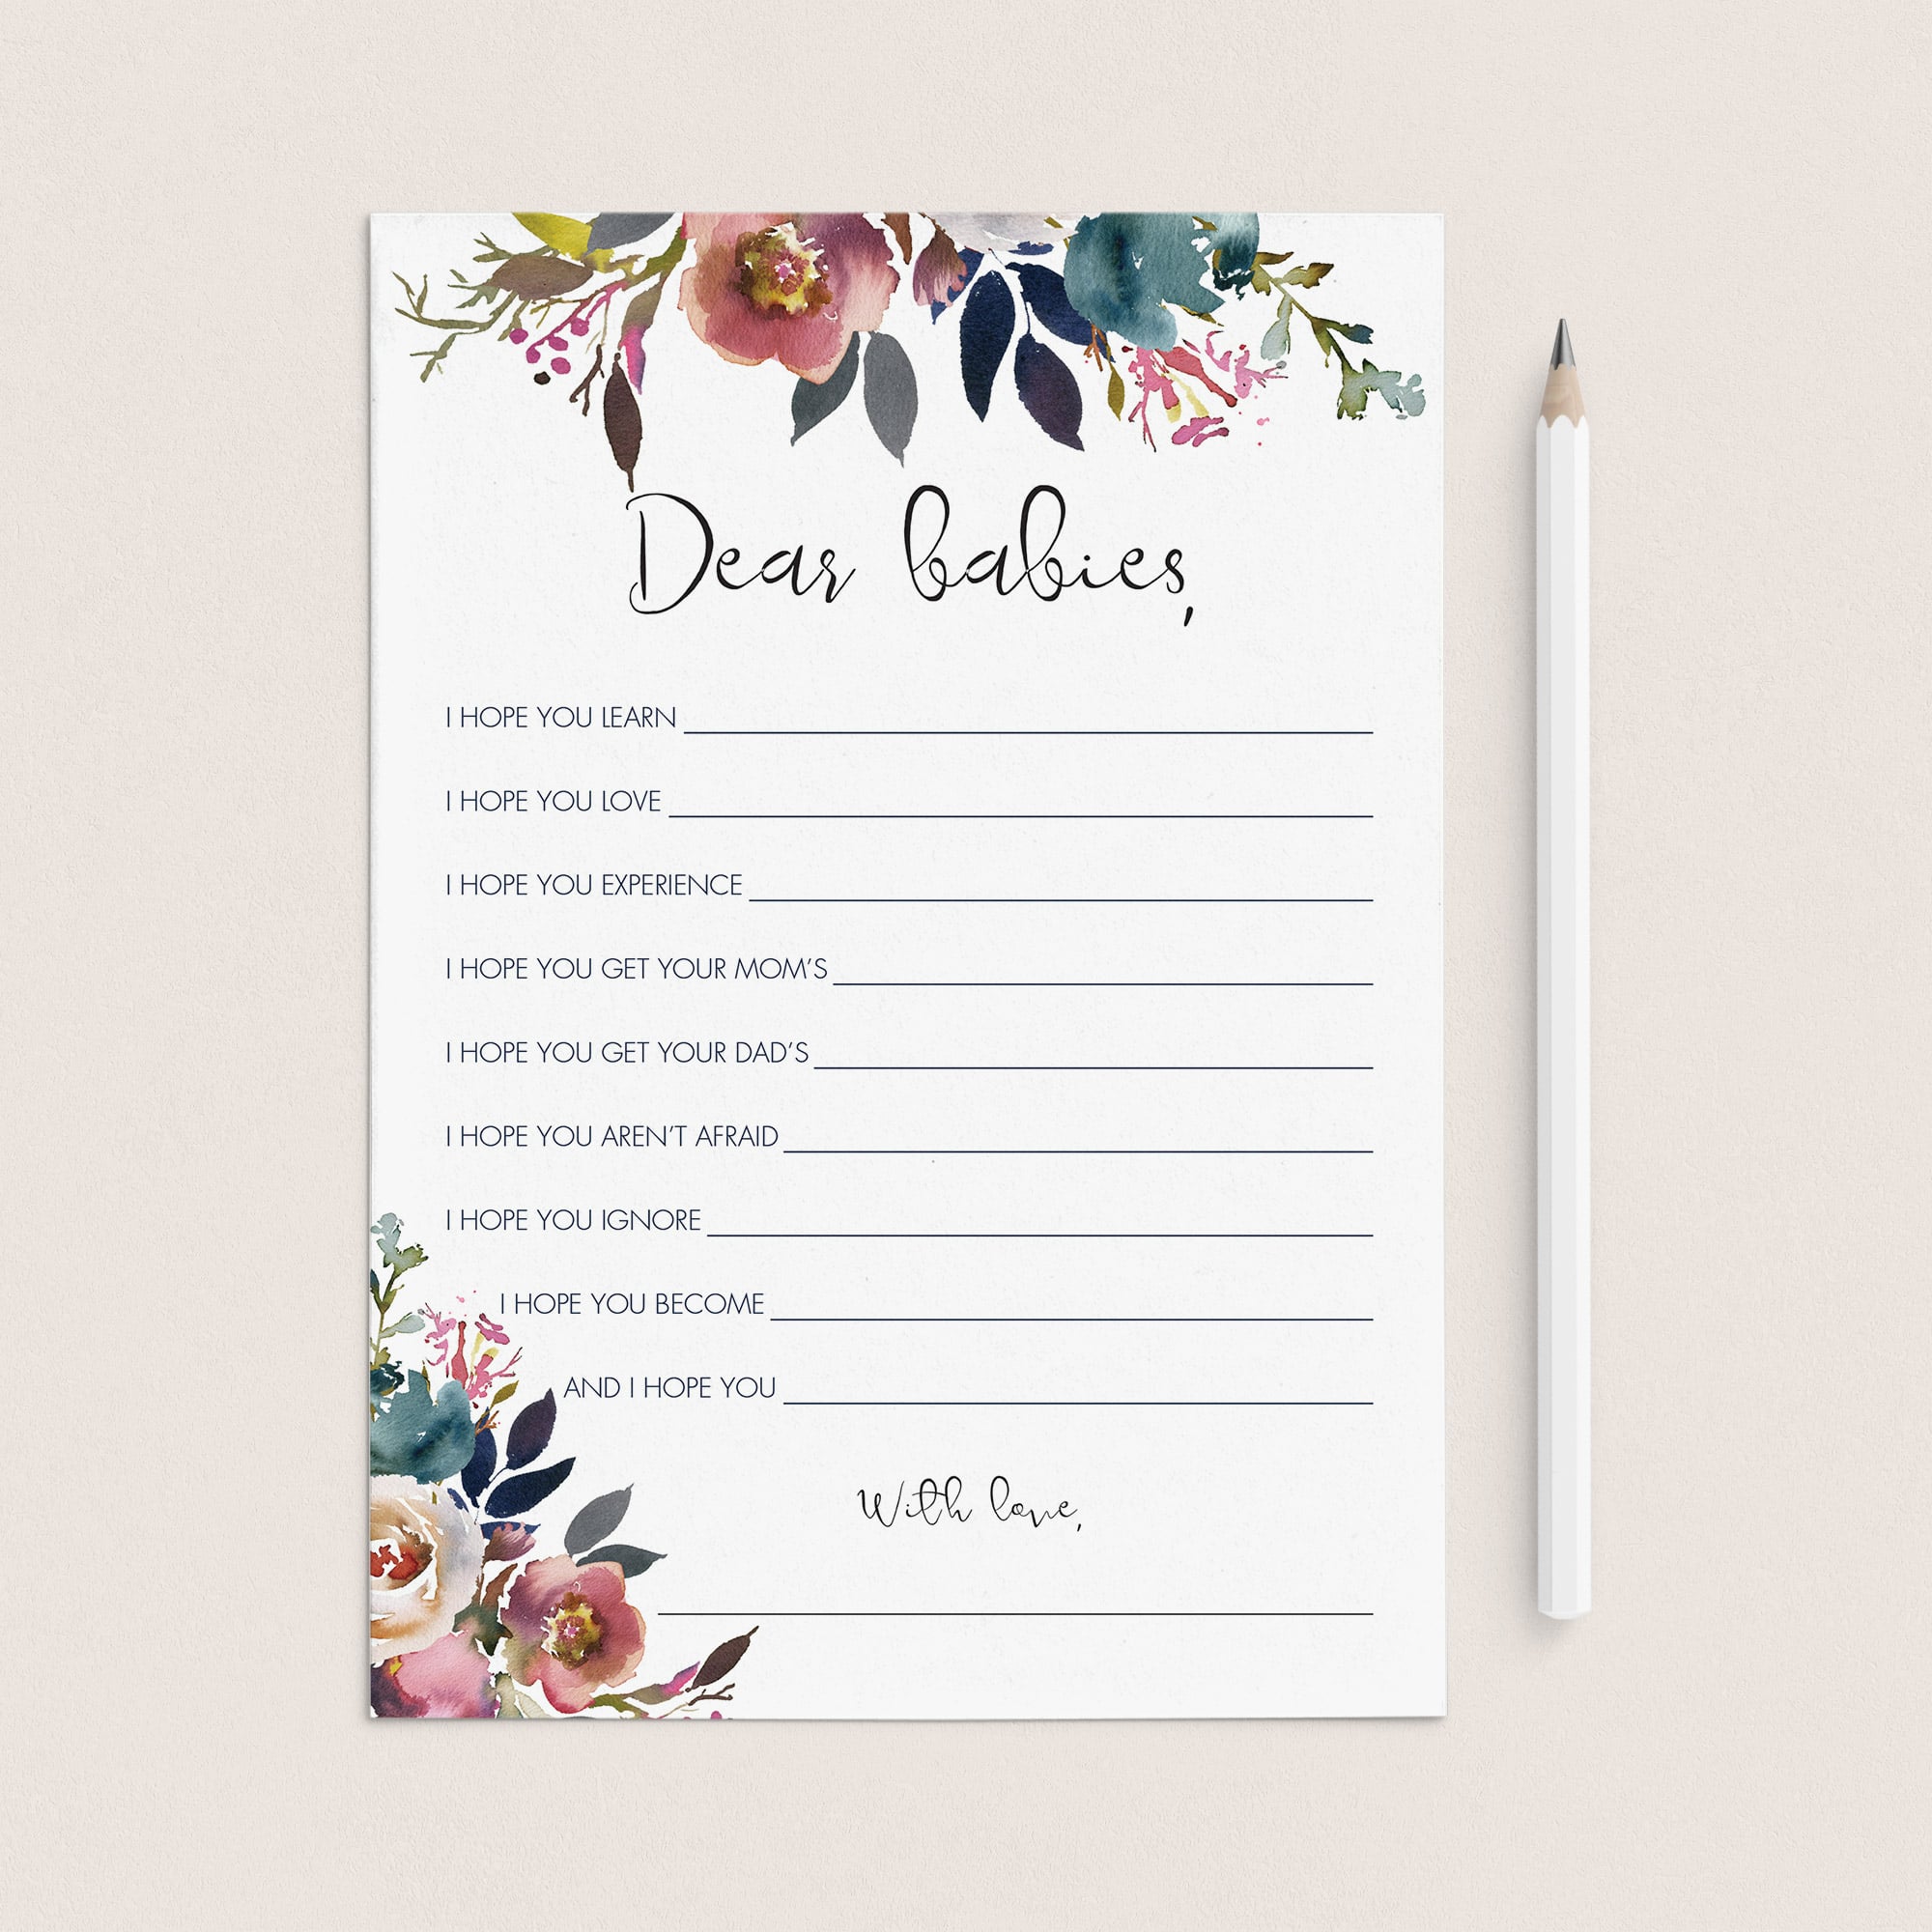 Floral dear babies printable baby shower cards by LittleSizzle